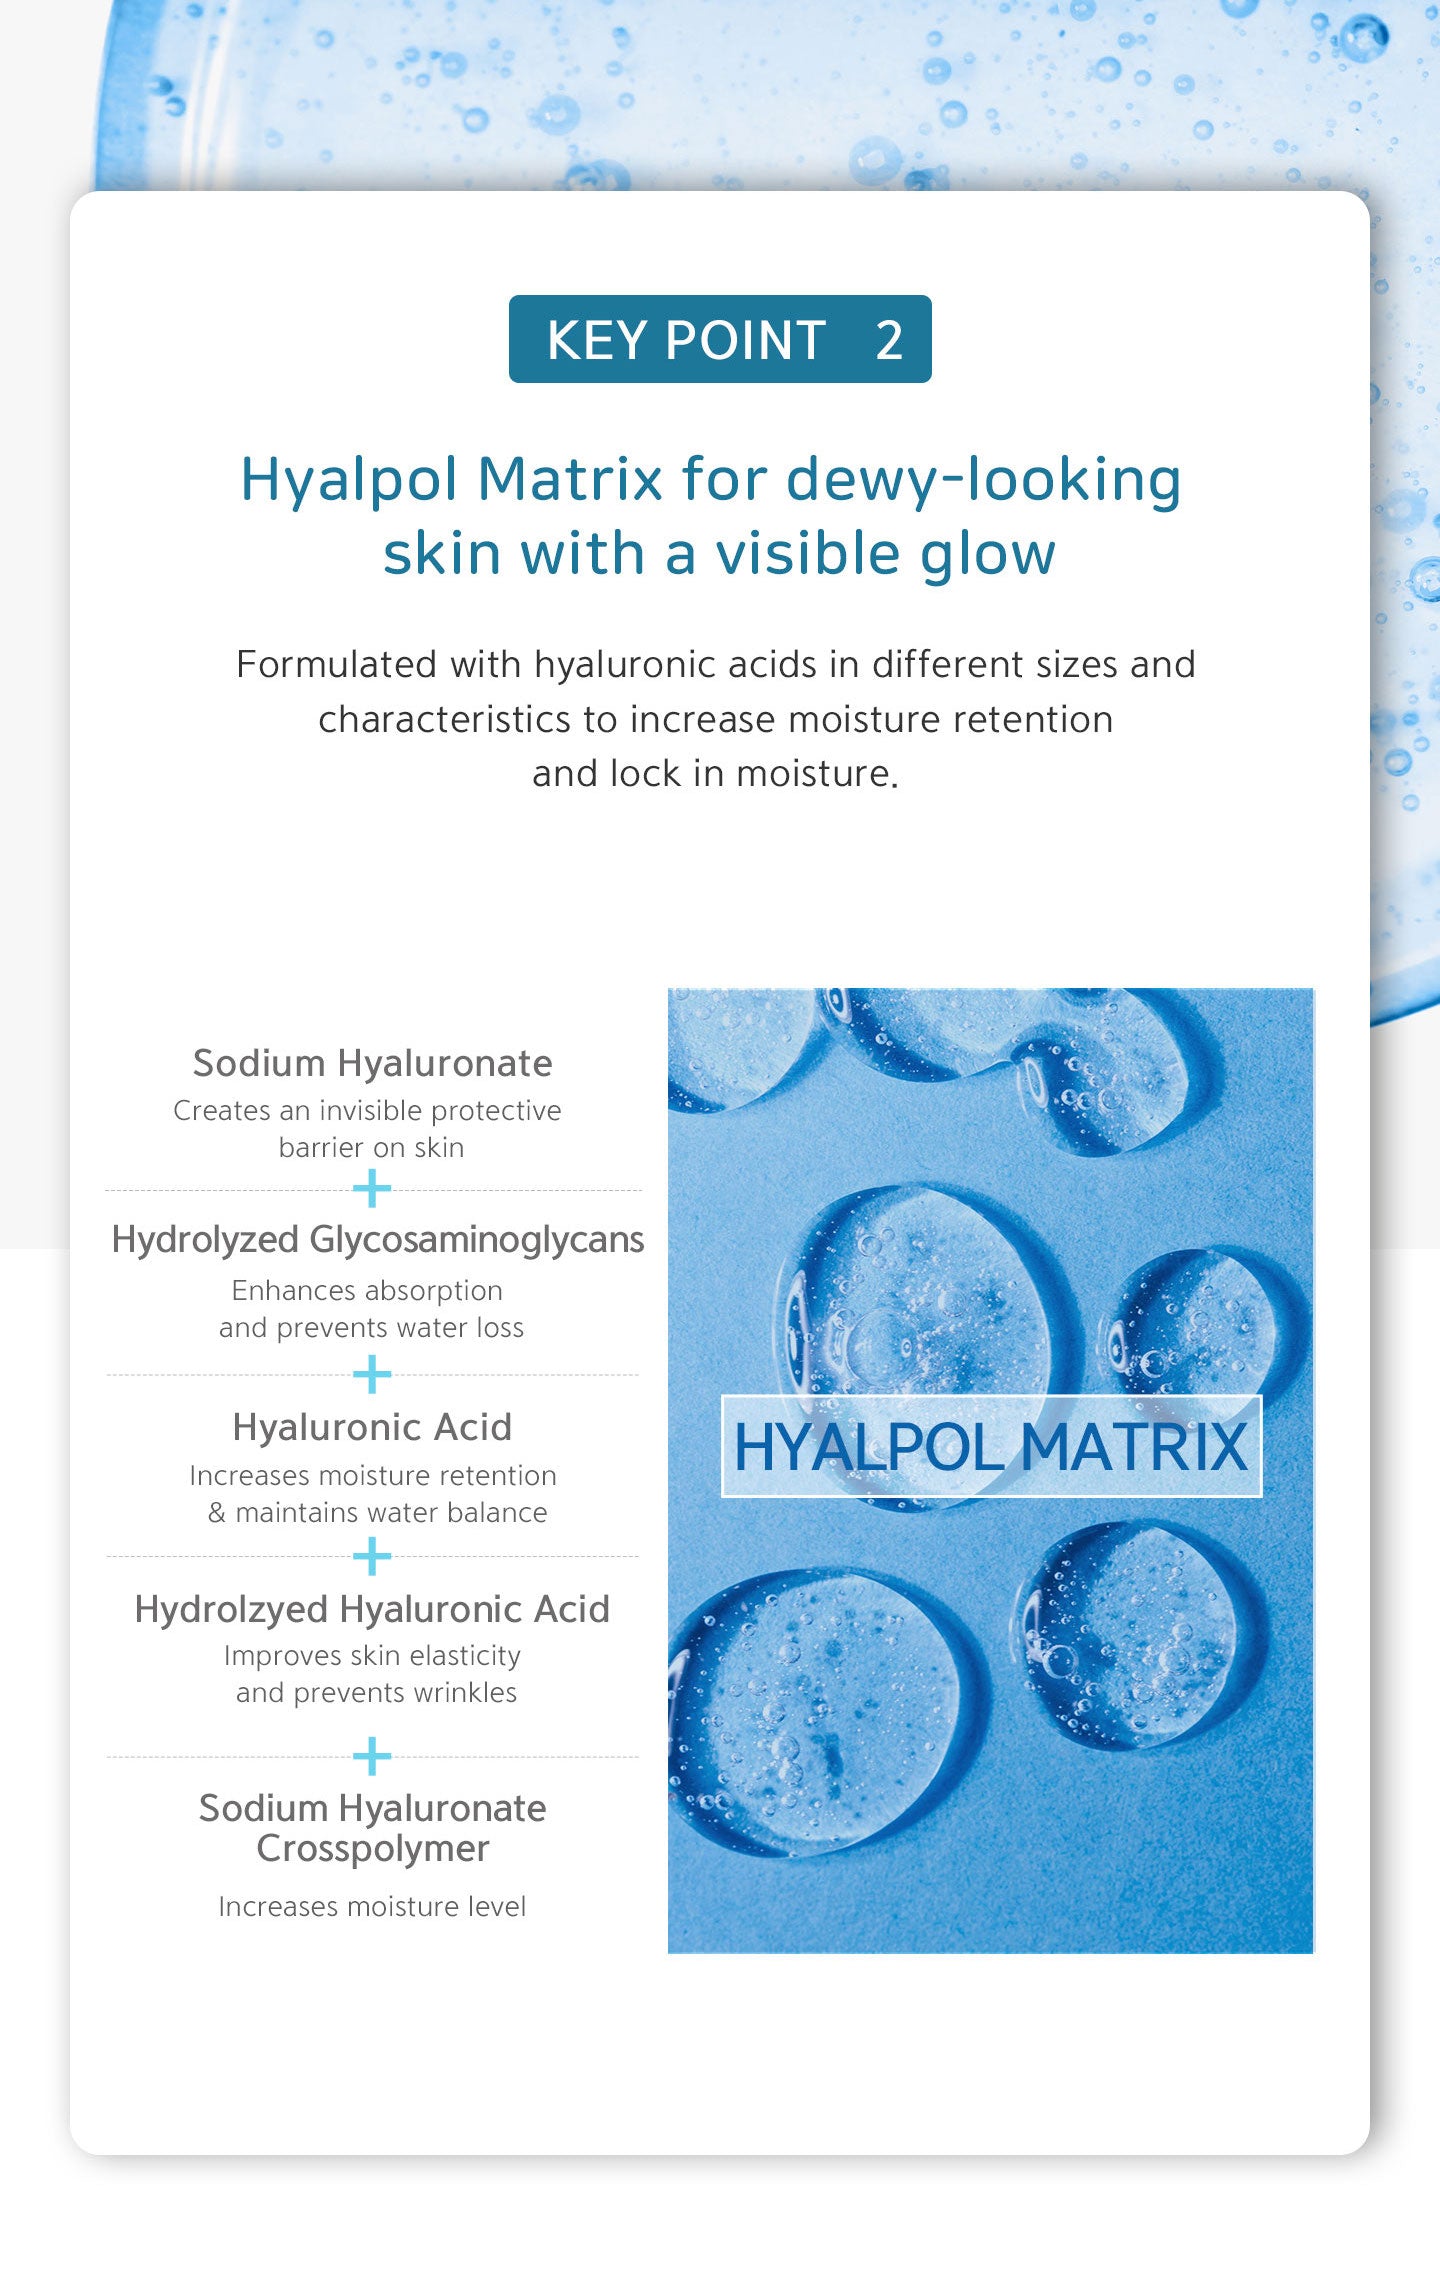 Formulated with hyaluronic acids in different sizes and characteristics to increase moisture retention and lock in moisture. Hyalpol matrix: sodium hyaluronate + hydrolyzed glycosaminoglycans + hyaluronic acid + hydrolyzed hyaluronic acid + sodium hyaluro